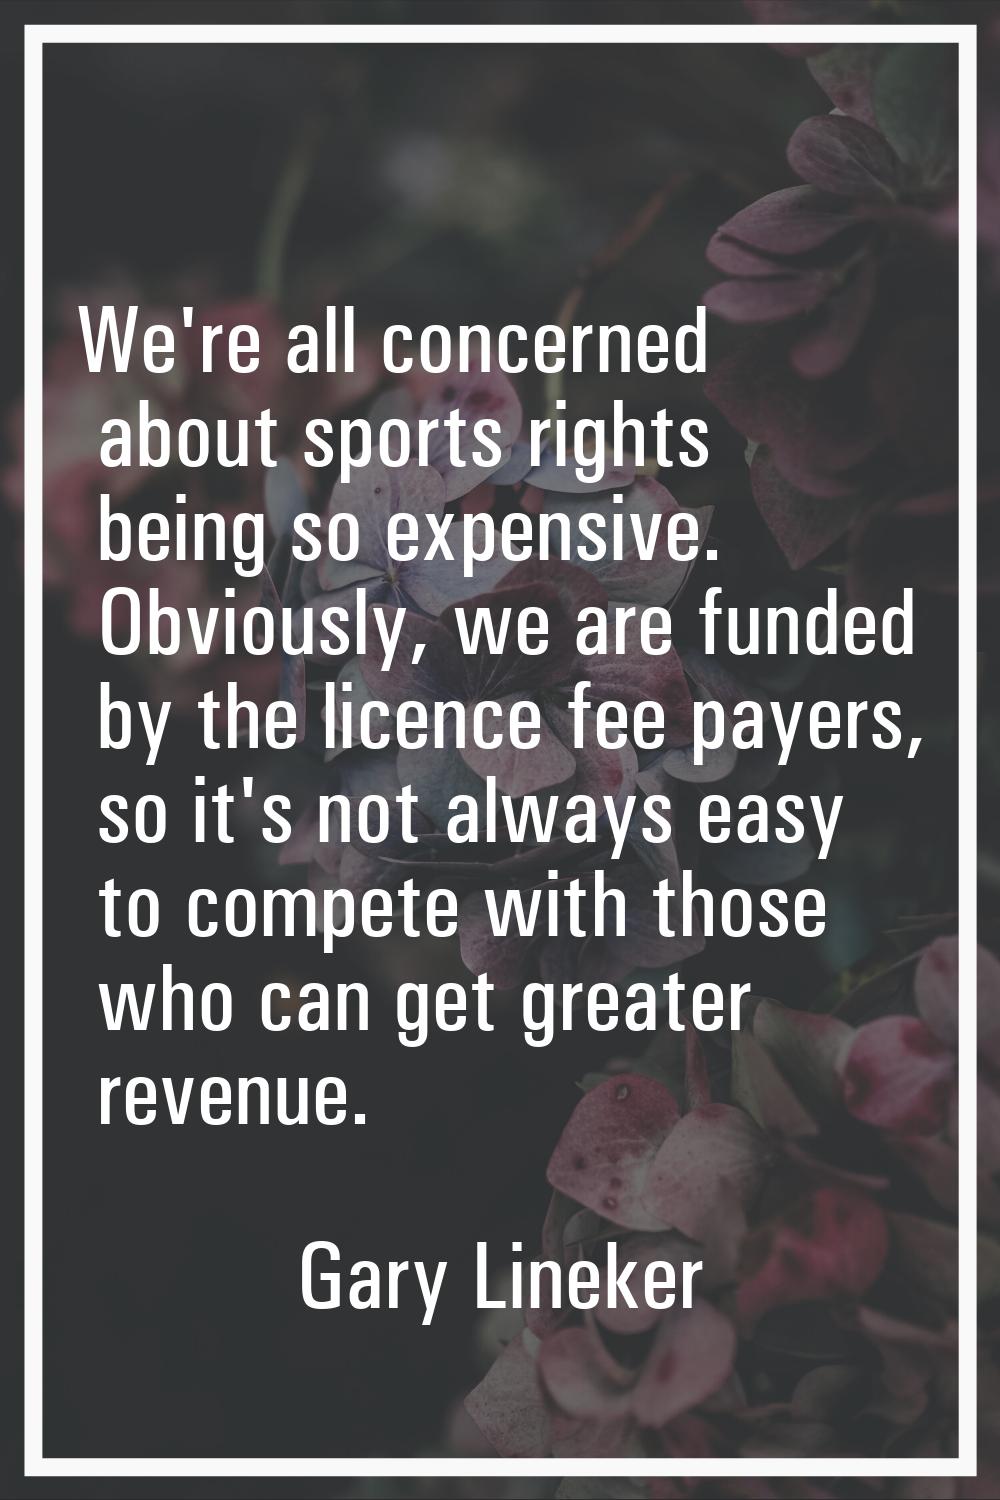 We're all concerned about sports rights being so expensive. Obviously, we are funded by the licence